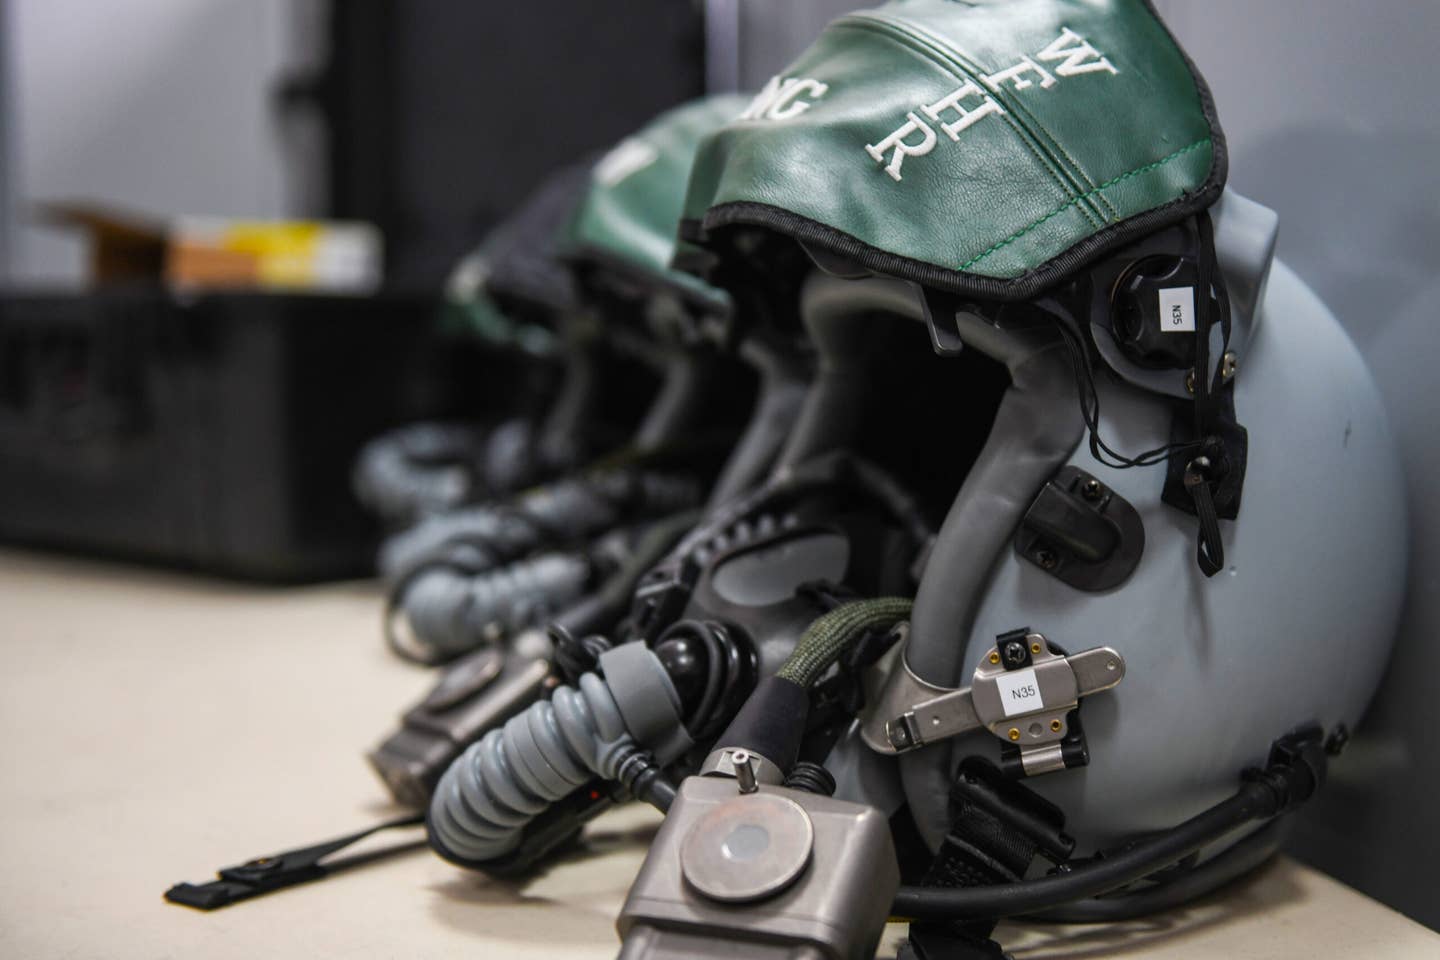 Four HGU-55/P Joint Helmet Mounted Cueing Systems sit on a table at Graf Ignatievo Air Base, Bulgaria. <em>Credit: U.S. Air Force photo by Airman 1st Class Ericka A. Woolever</em>